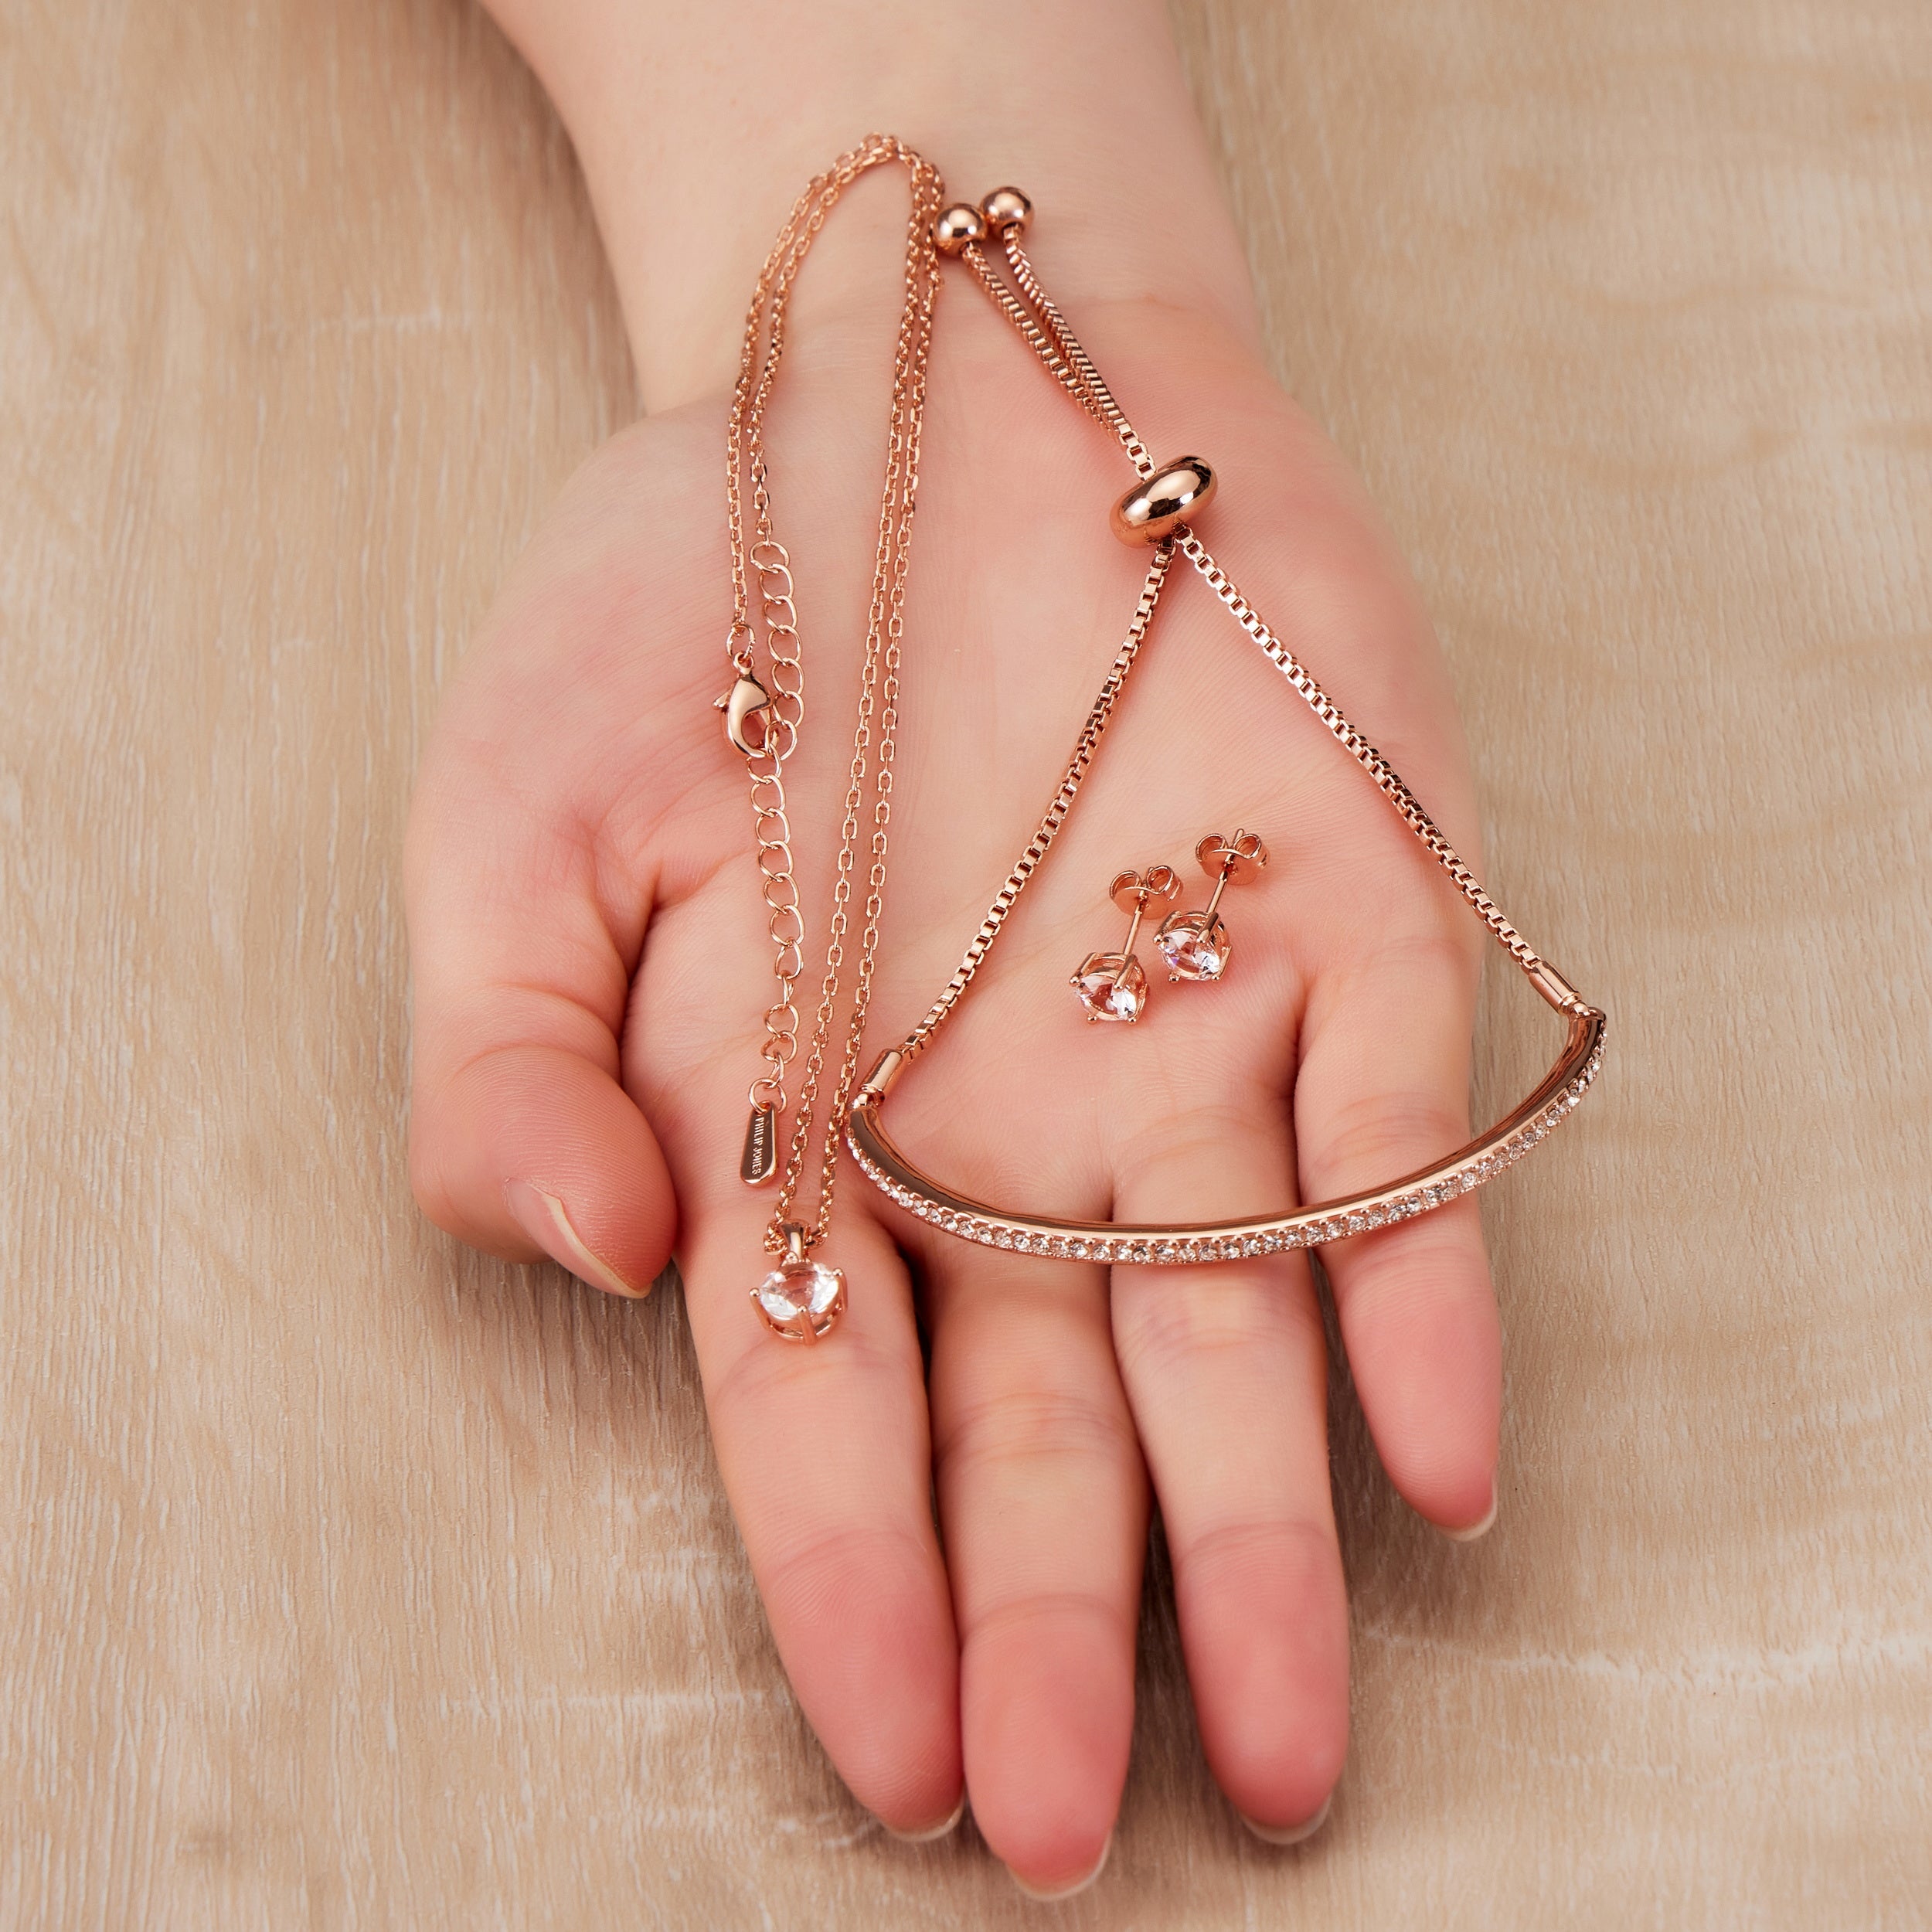 Rose Gold Plated Friendship Set Created with Zircondia® Crystals